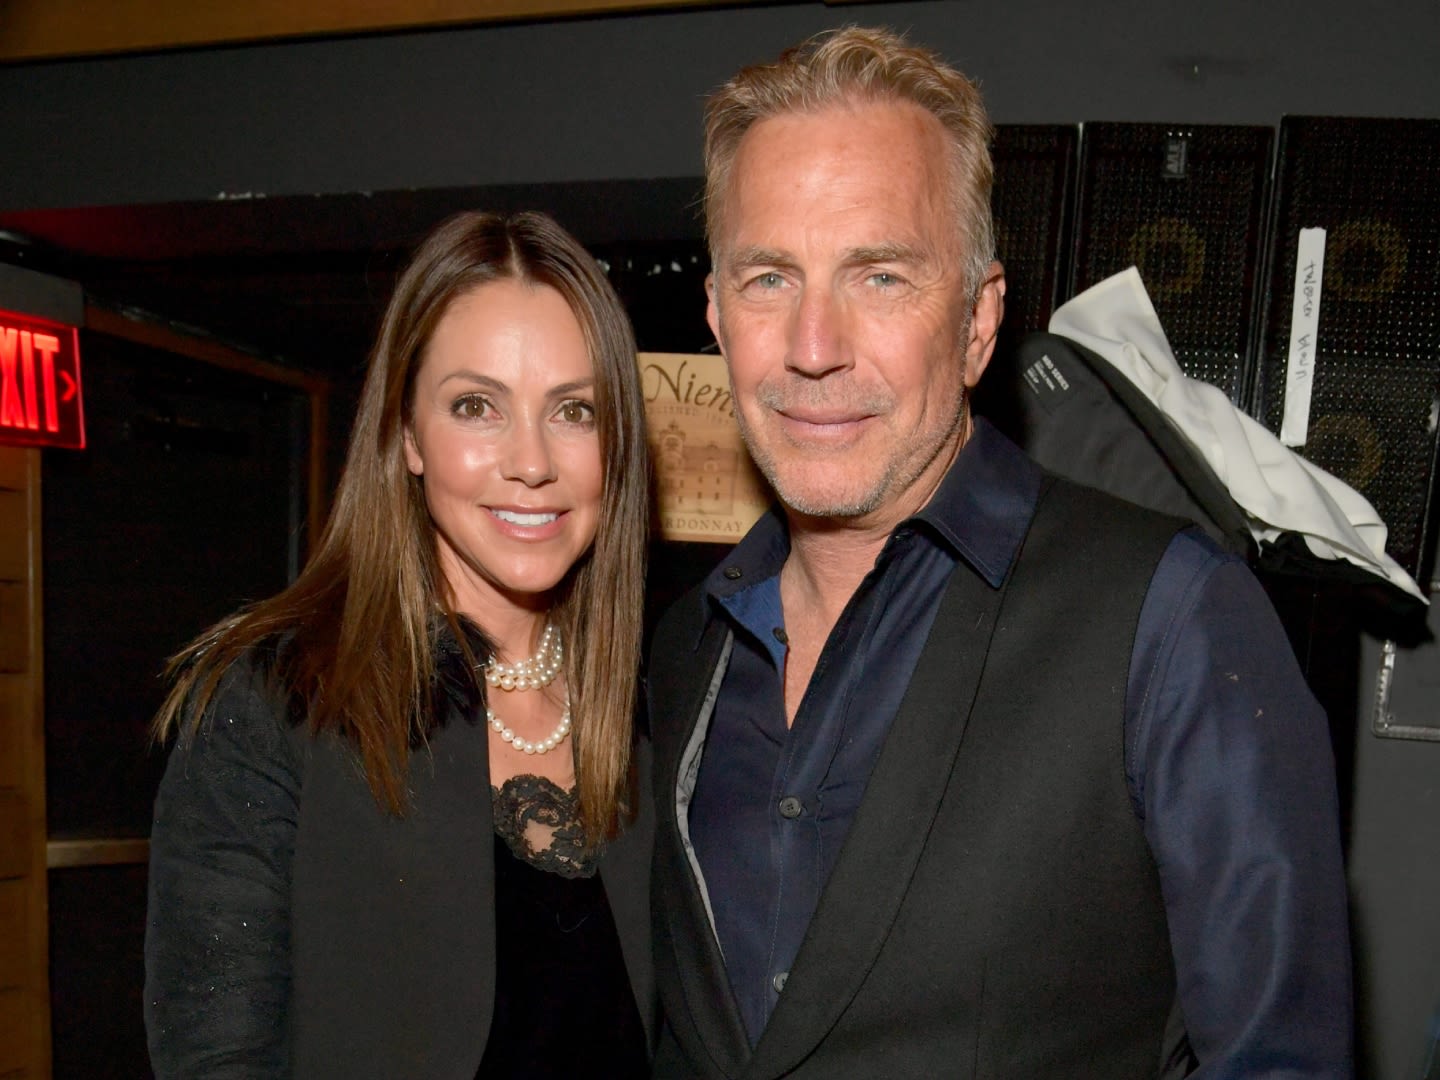 New Photos Show That Kevin Costner’s Ex-wife Christine Baumgartner’s Dating Life Is the Opposite of His